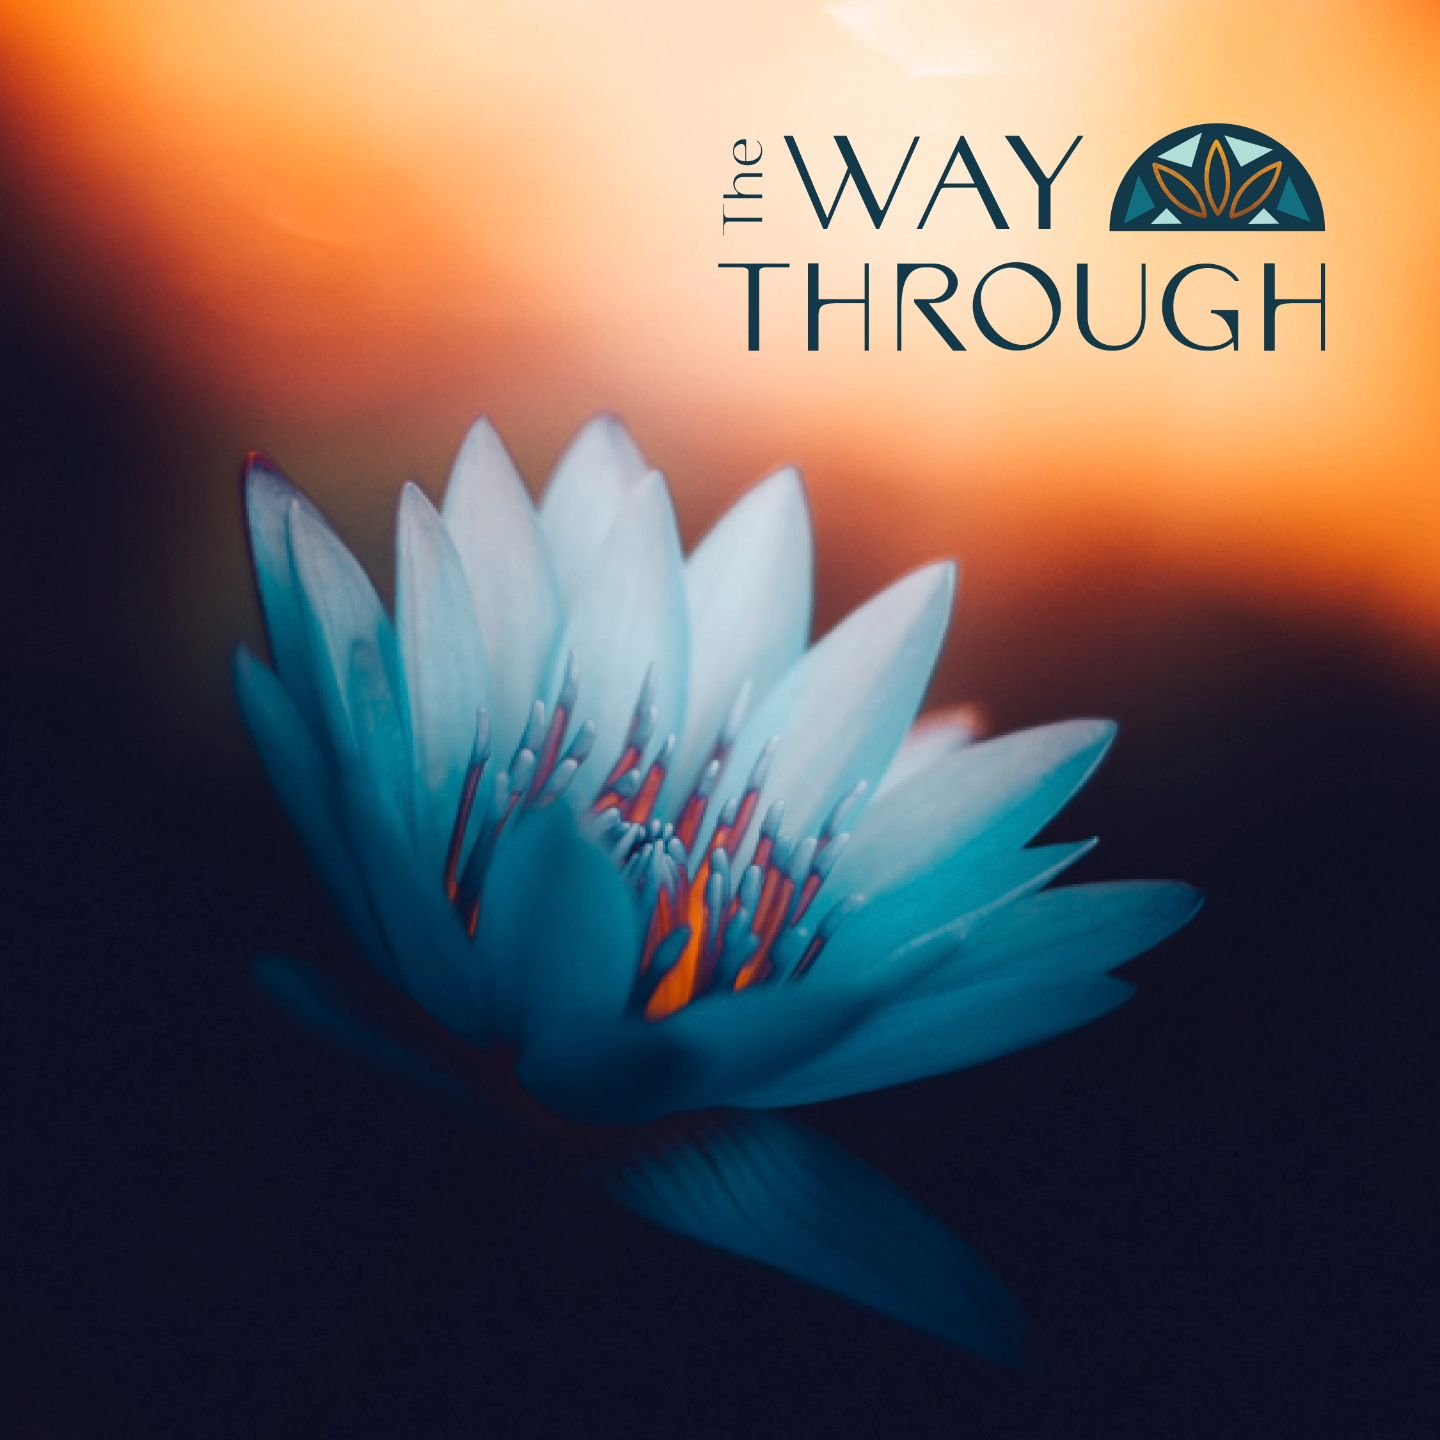 Paula is a grief counselor who started The Way Through, Grief Counseling to fill a gap in grief care, informed by lived experience. She wanted her brand and website design to be inspired by both the darkness and light to be found in nature.
 
We also